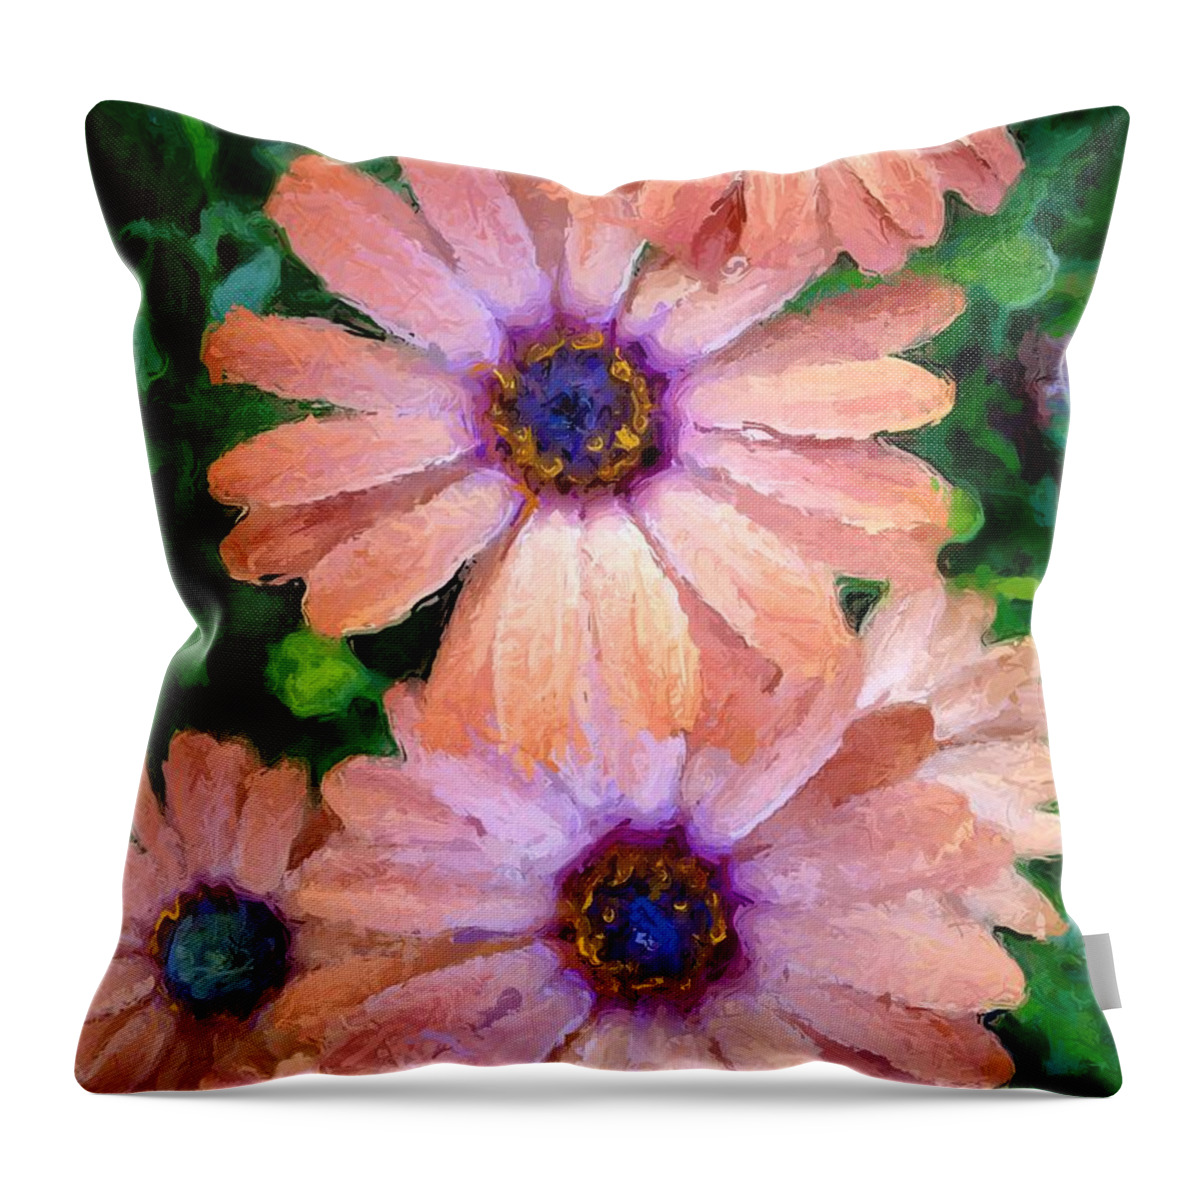  Throw Pillow featuring the photograph Bronze Beauty by Heidi Smith